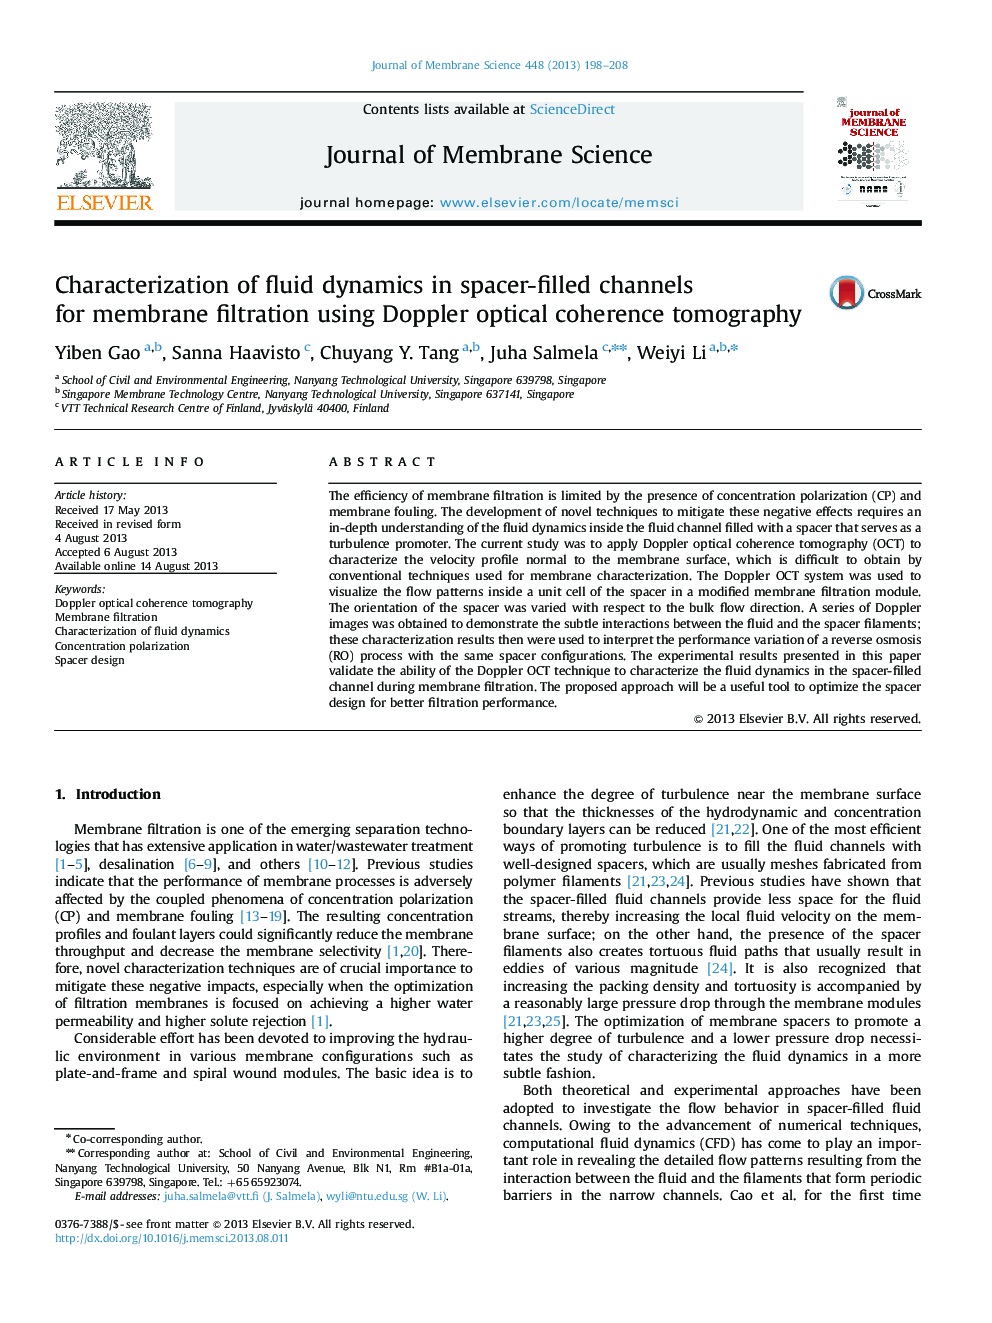 Characterization of fluid dynamics in spacer-filled channels for membrane filtration using Doppler optical coherence tomography